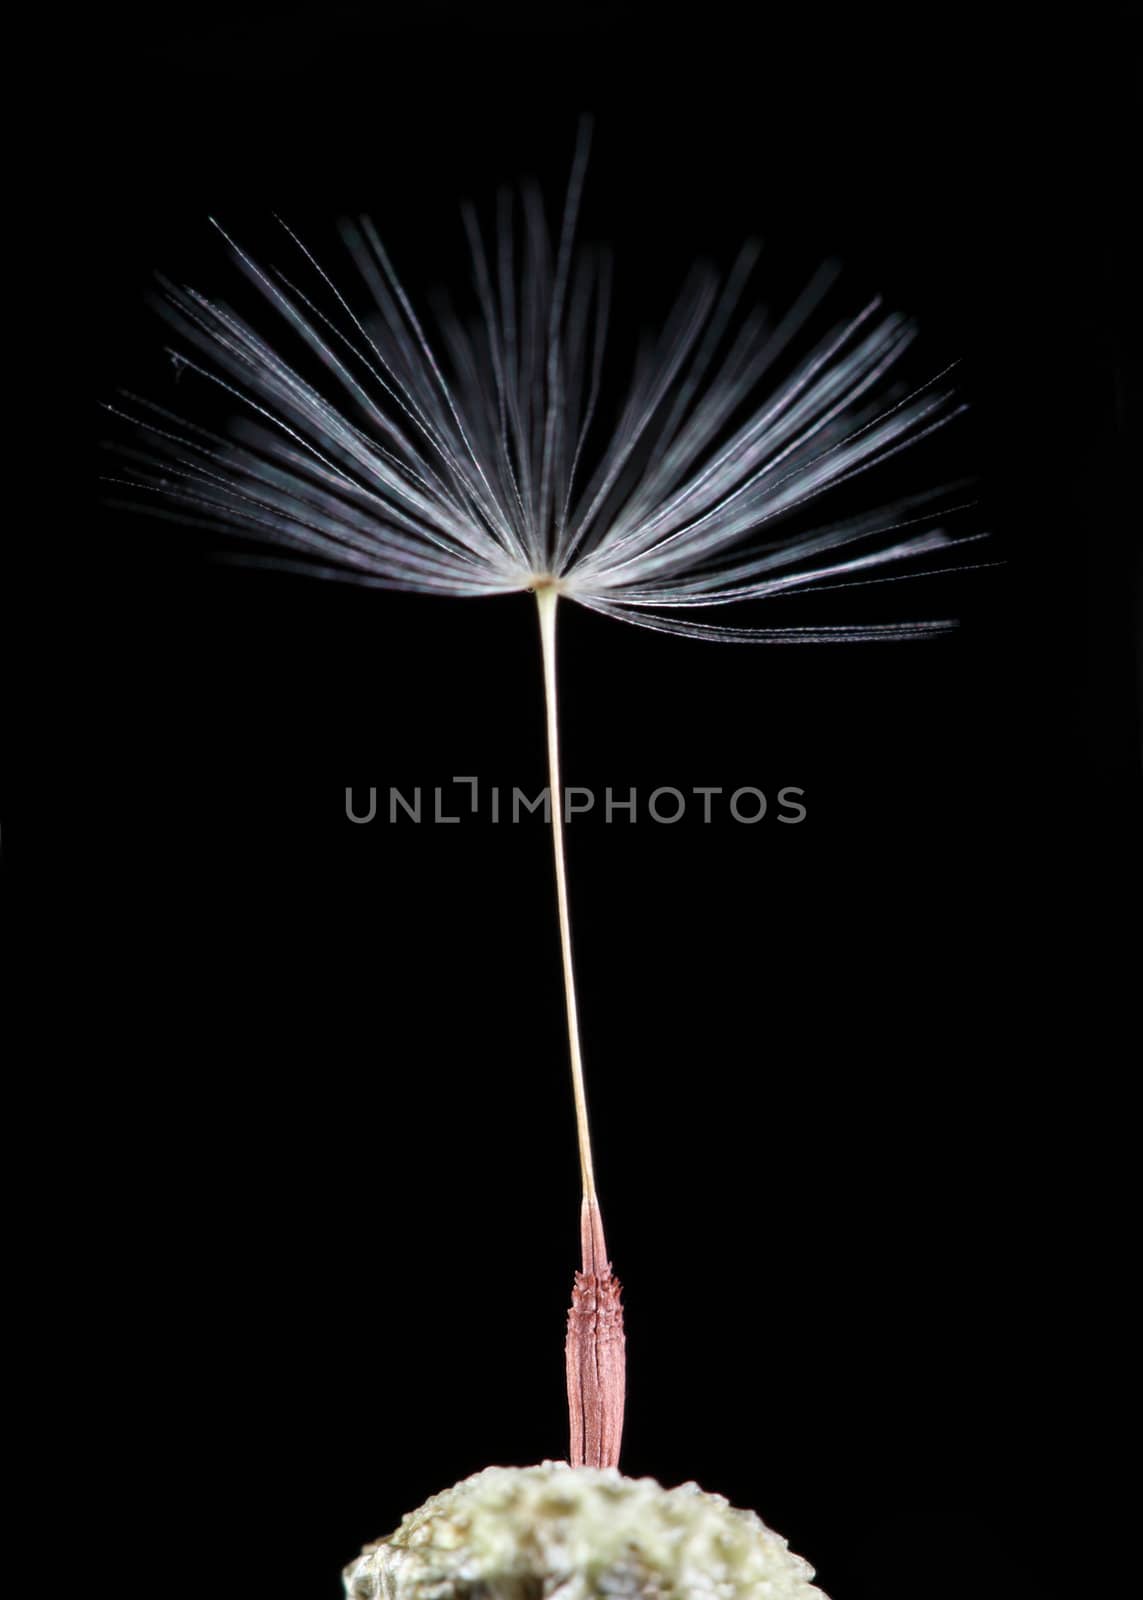 A macro shot of a single dandelion seed on the tip of a dandelion. Shot taken with a 100mm macro lens and extension tubes against a solid black background.